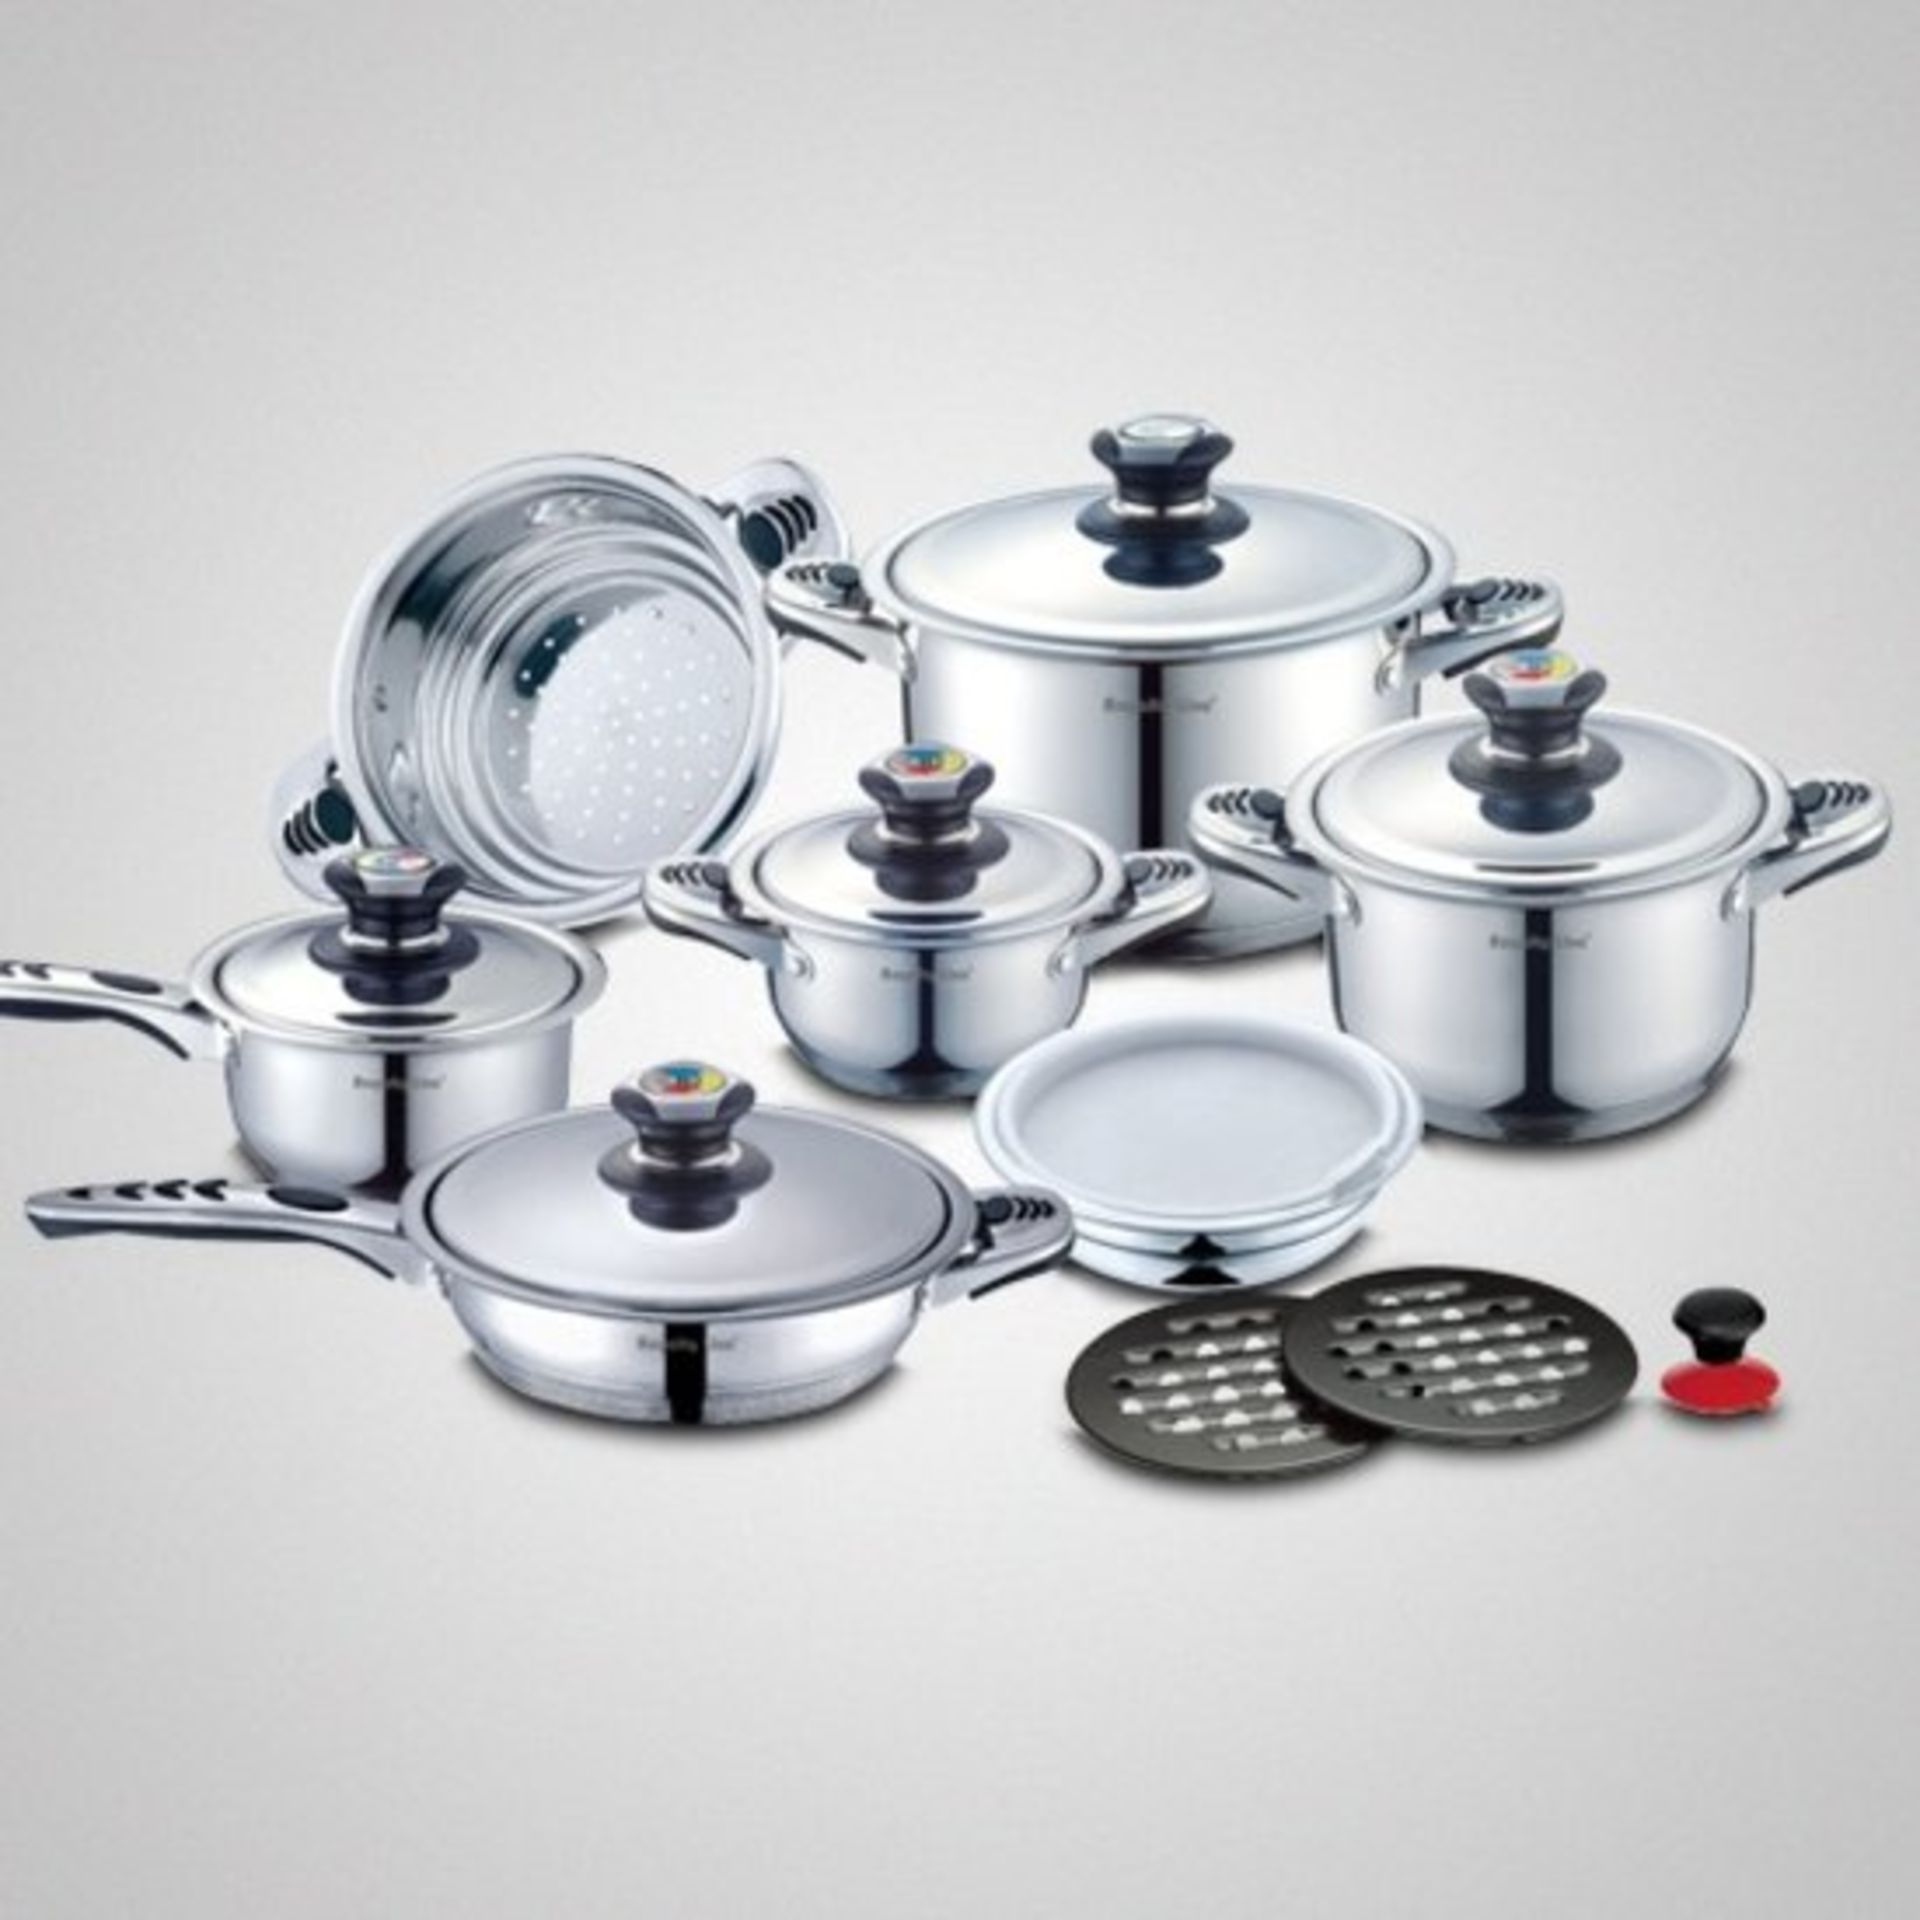 V *TRADE QTY* Brand New 16 Piece Stainless Steel Cookware Set Suitable For All Types Of Stoves - 3